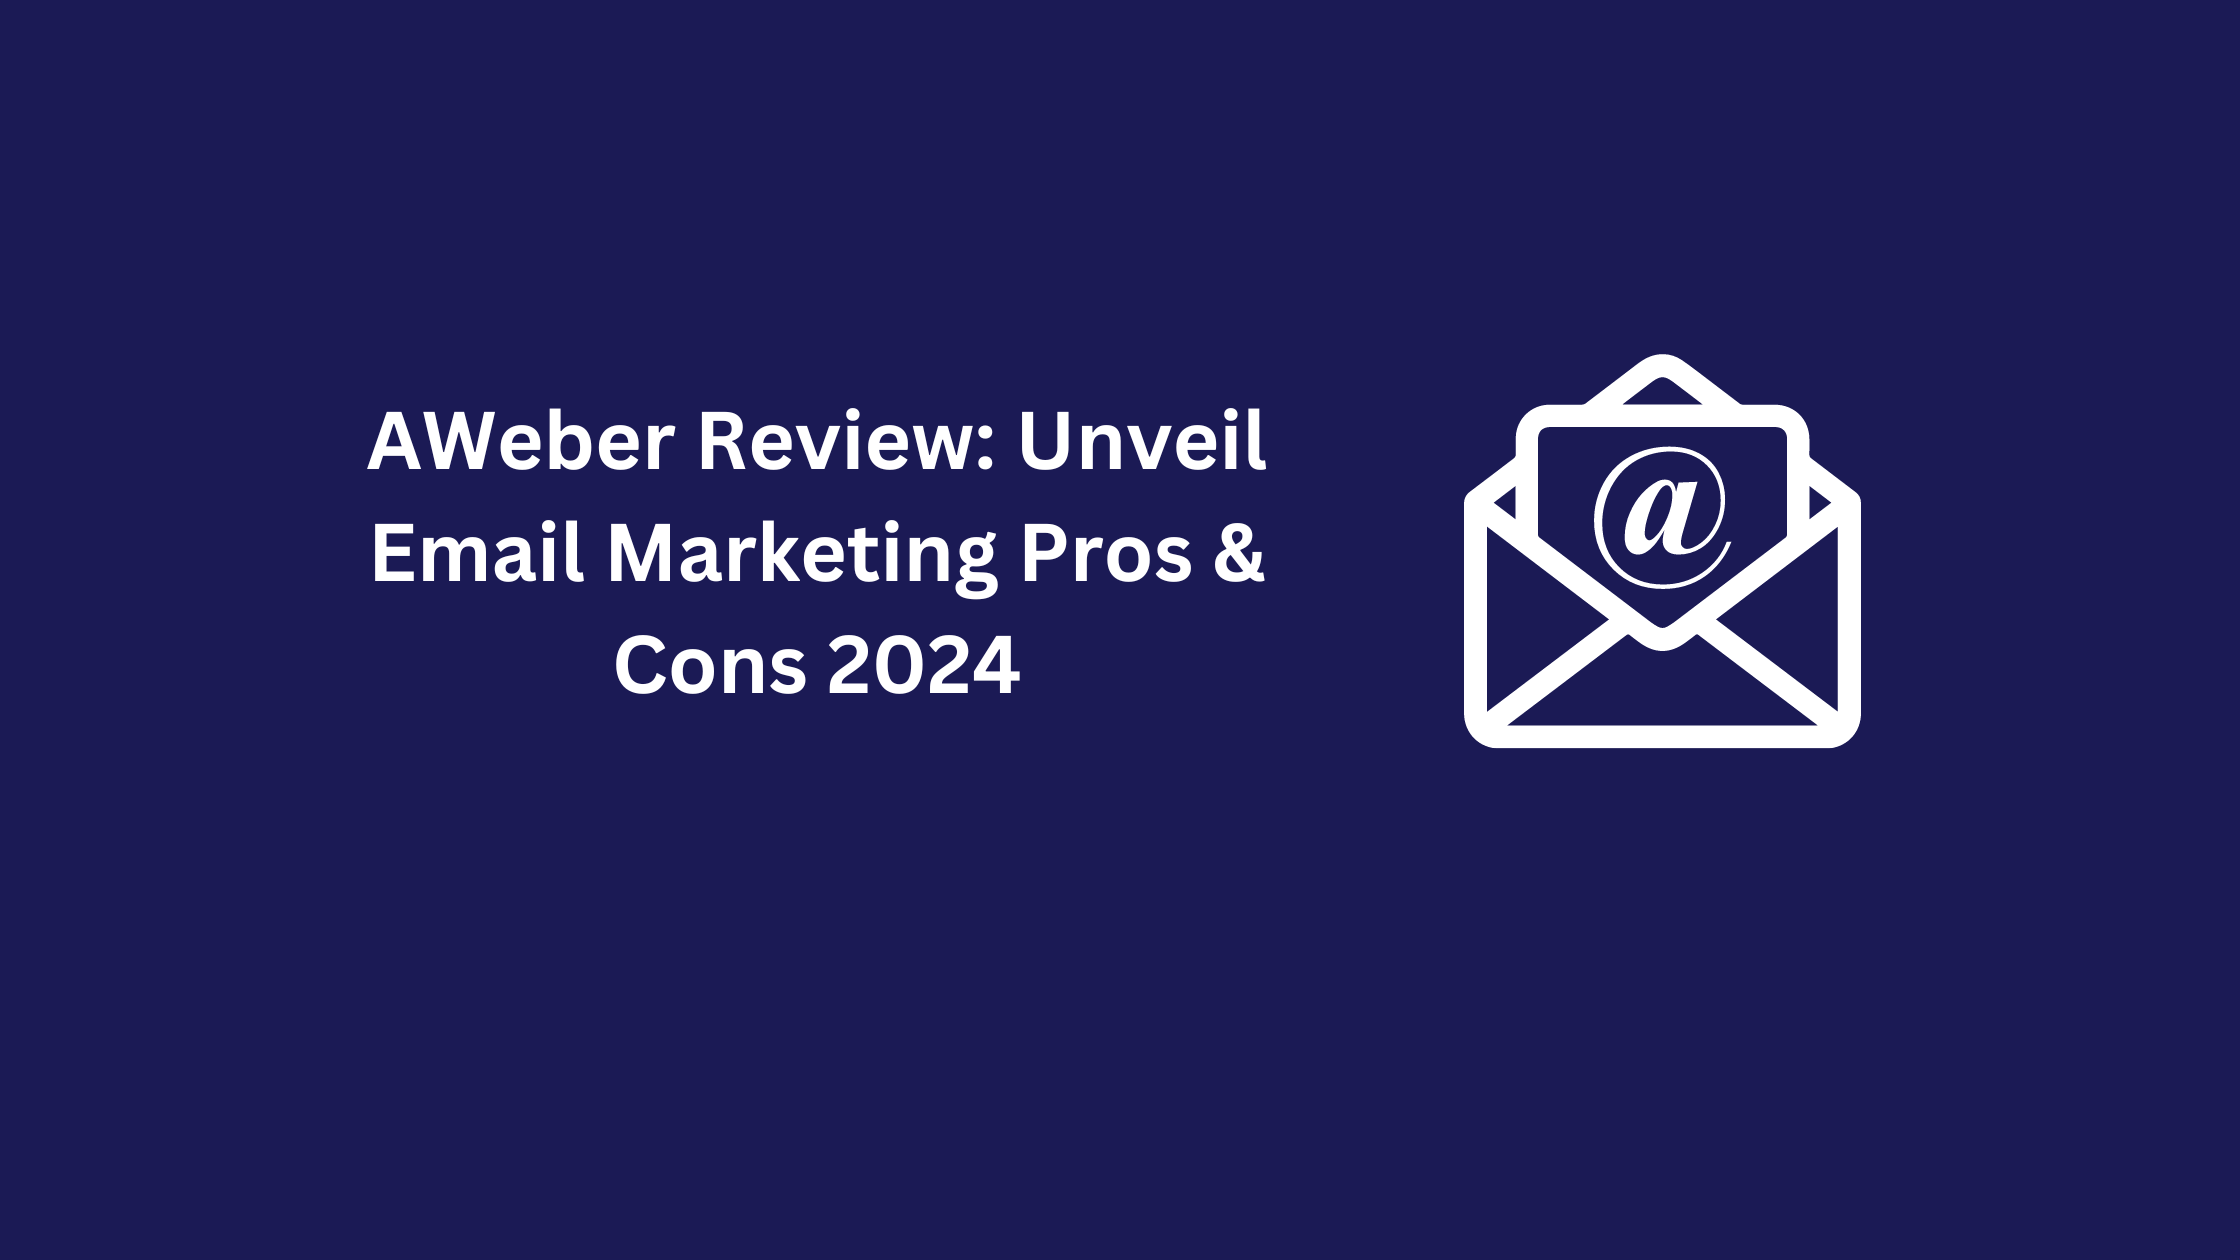 AWeber Review: Unveil Email Marketing Pros & Cons 2024